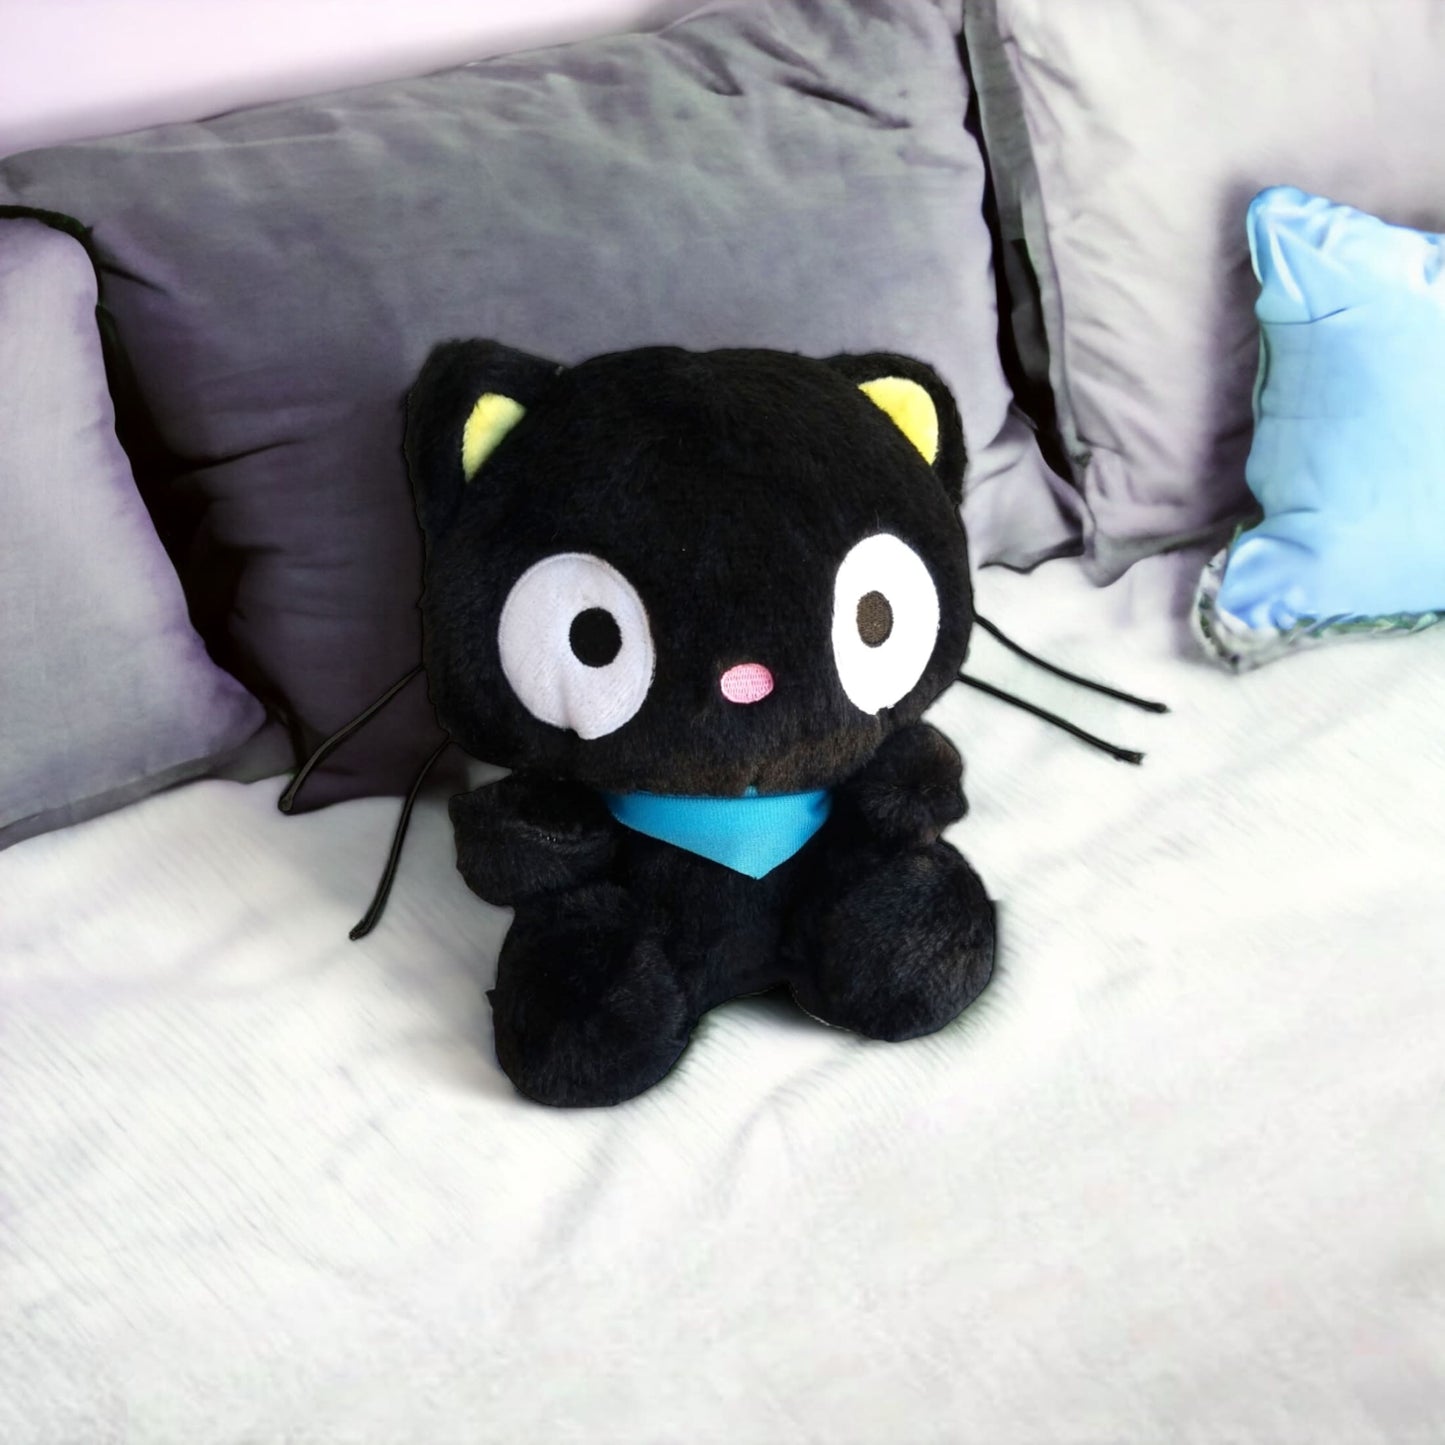 Chococat Plush from Confetti Kitty, Only 24.99